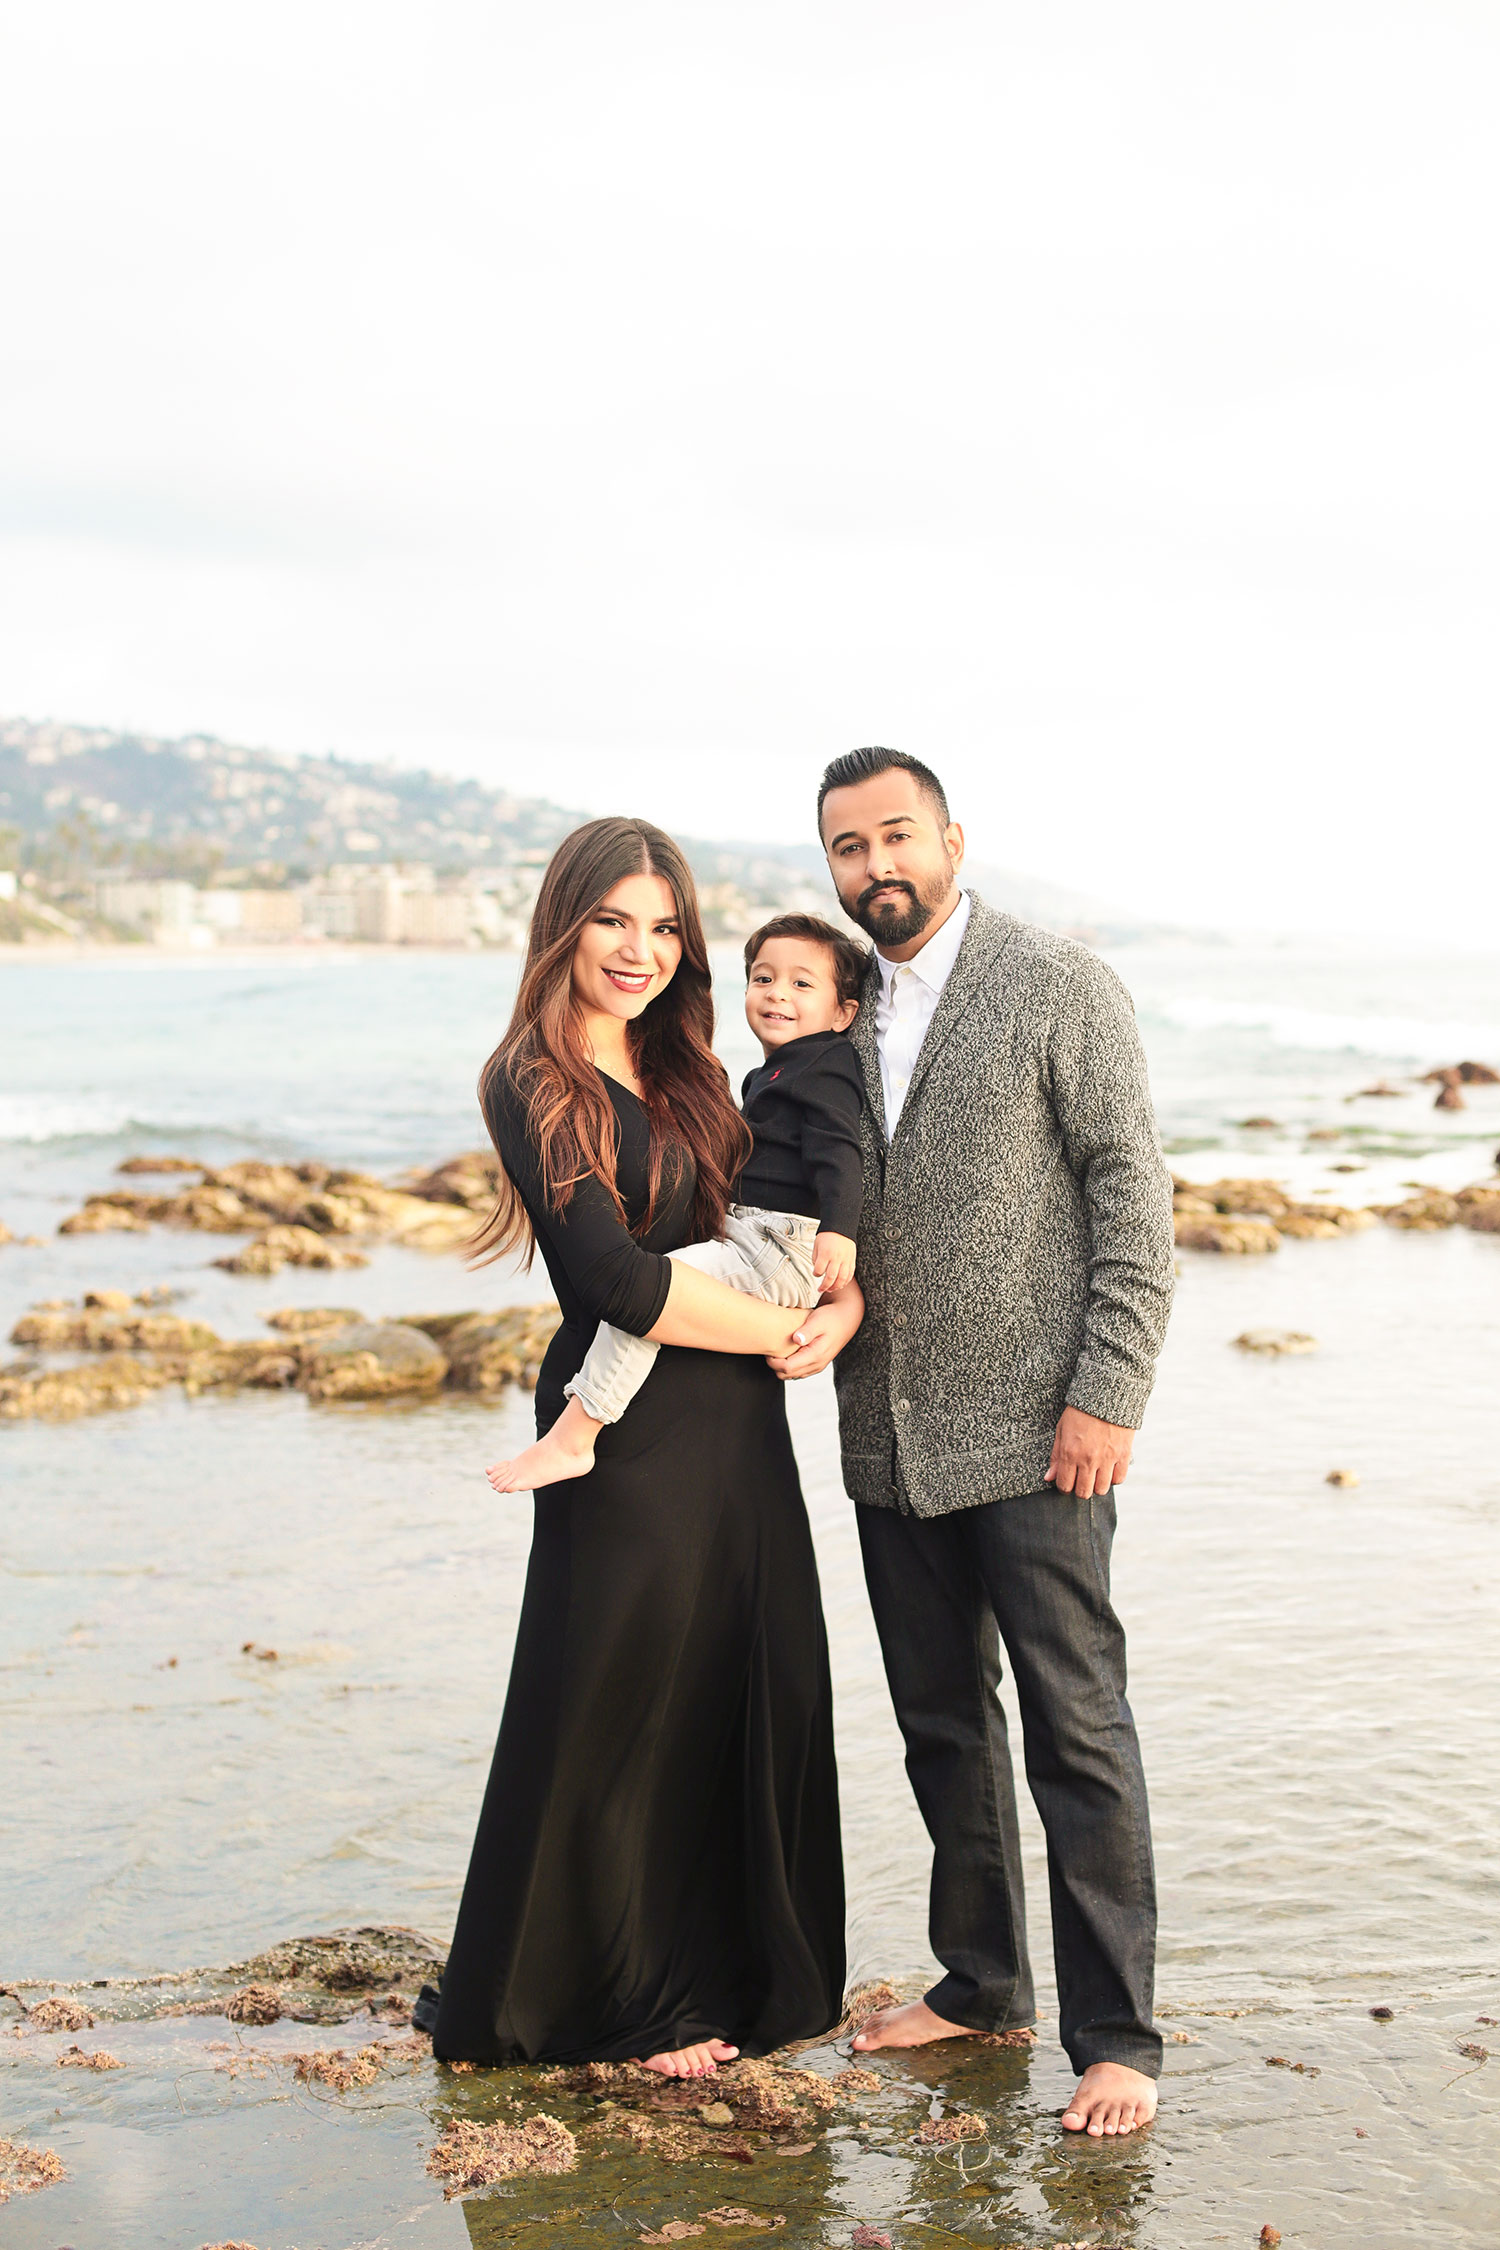 los angeles family photography photographer portraits the best near me 513